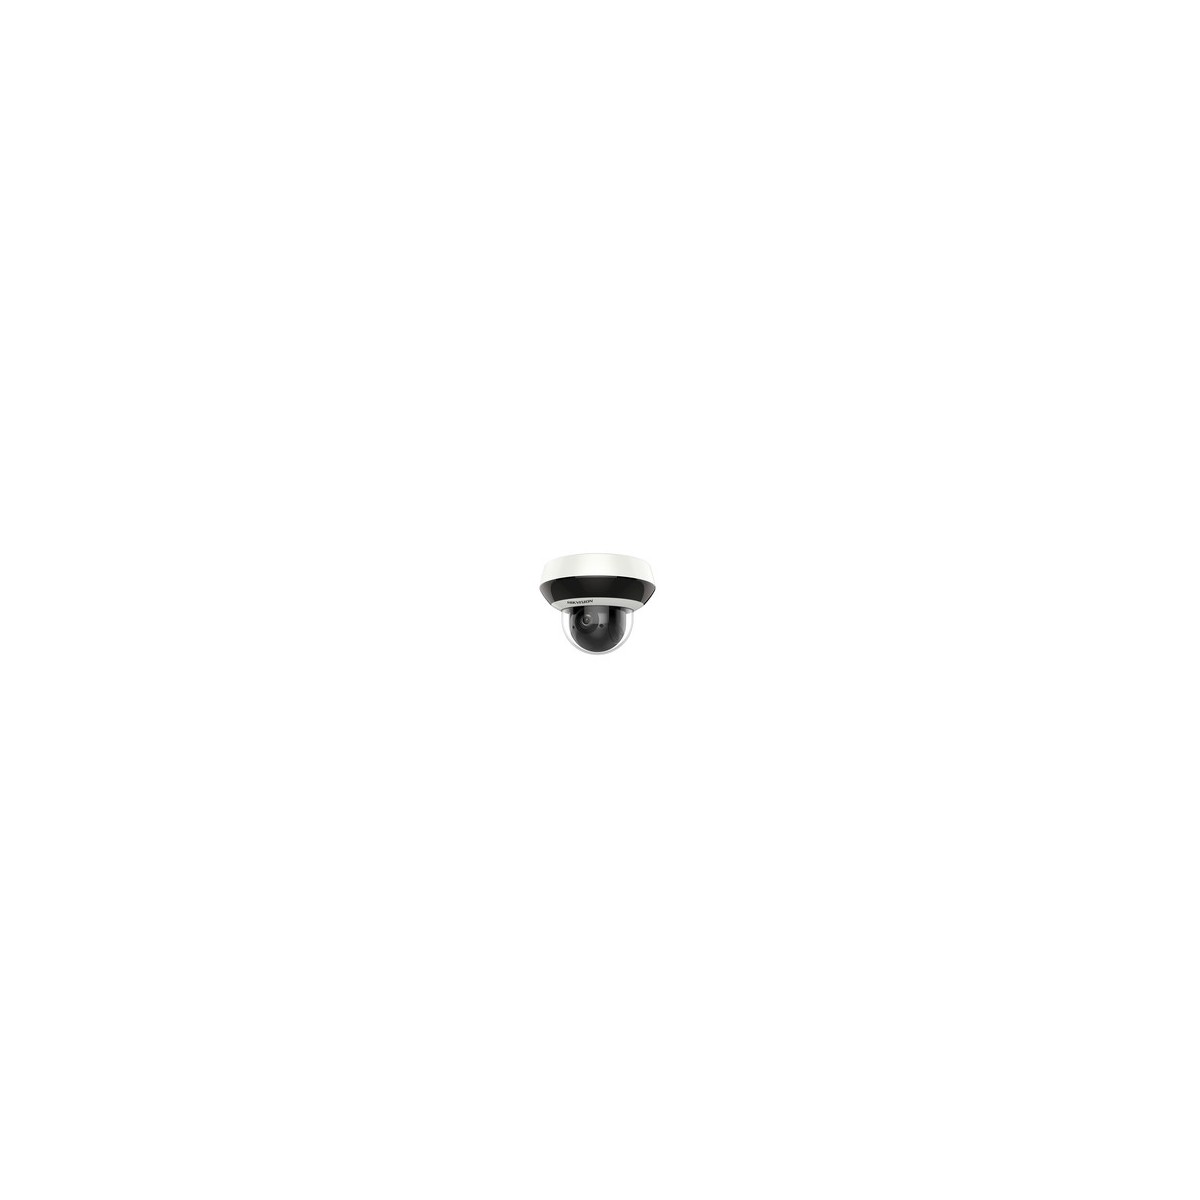 Hikvision DS-2DE2A404IW-DE3 - IP security camera - Indoor  outdoor - Wired - Dome - Ceiling-Wall - Black,White